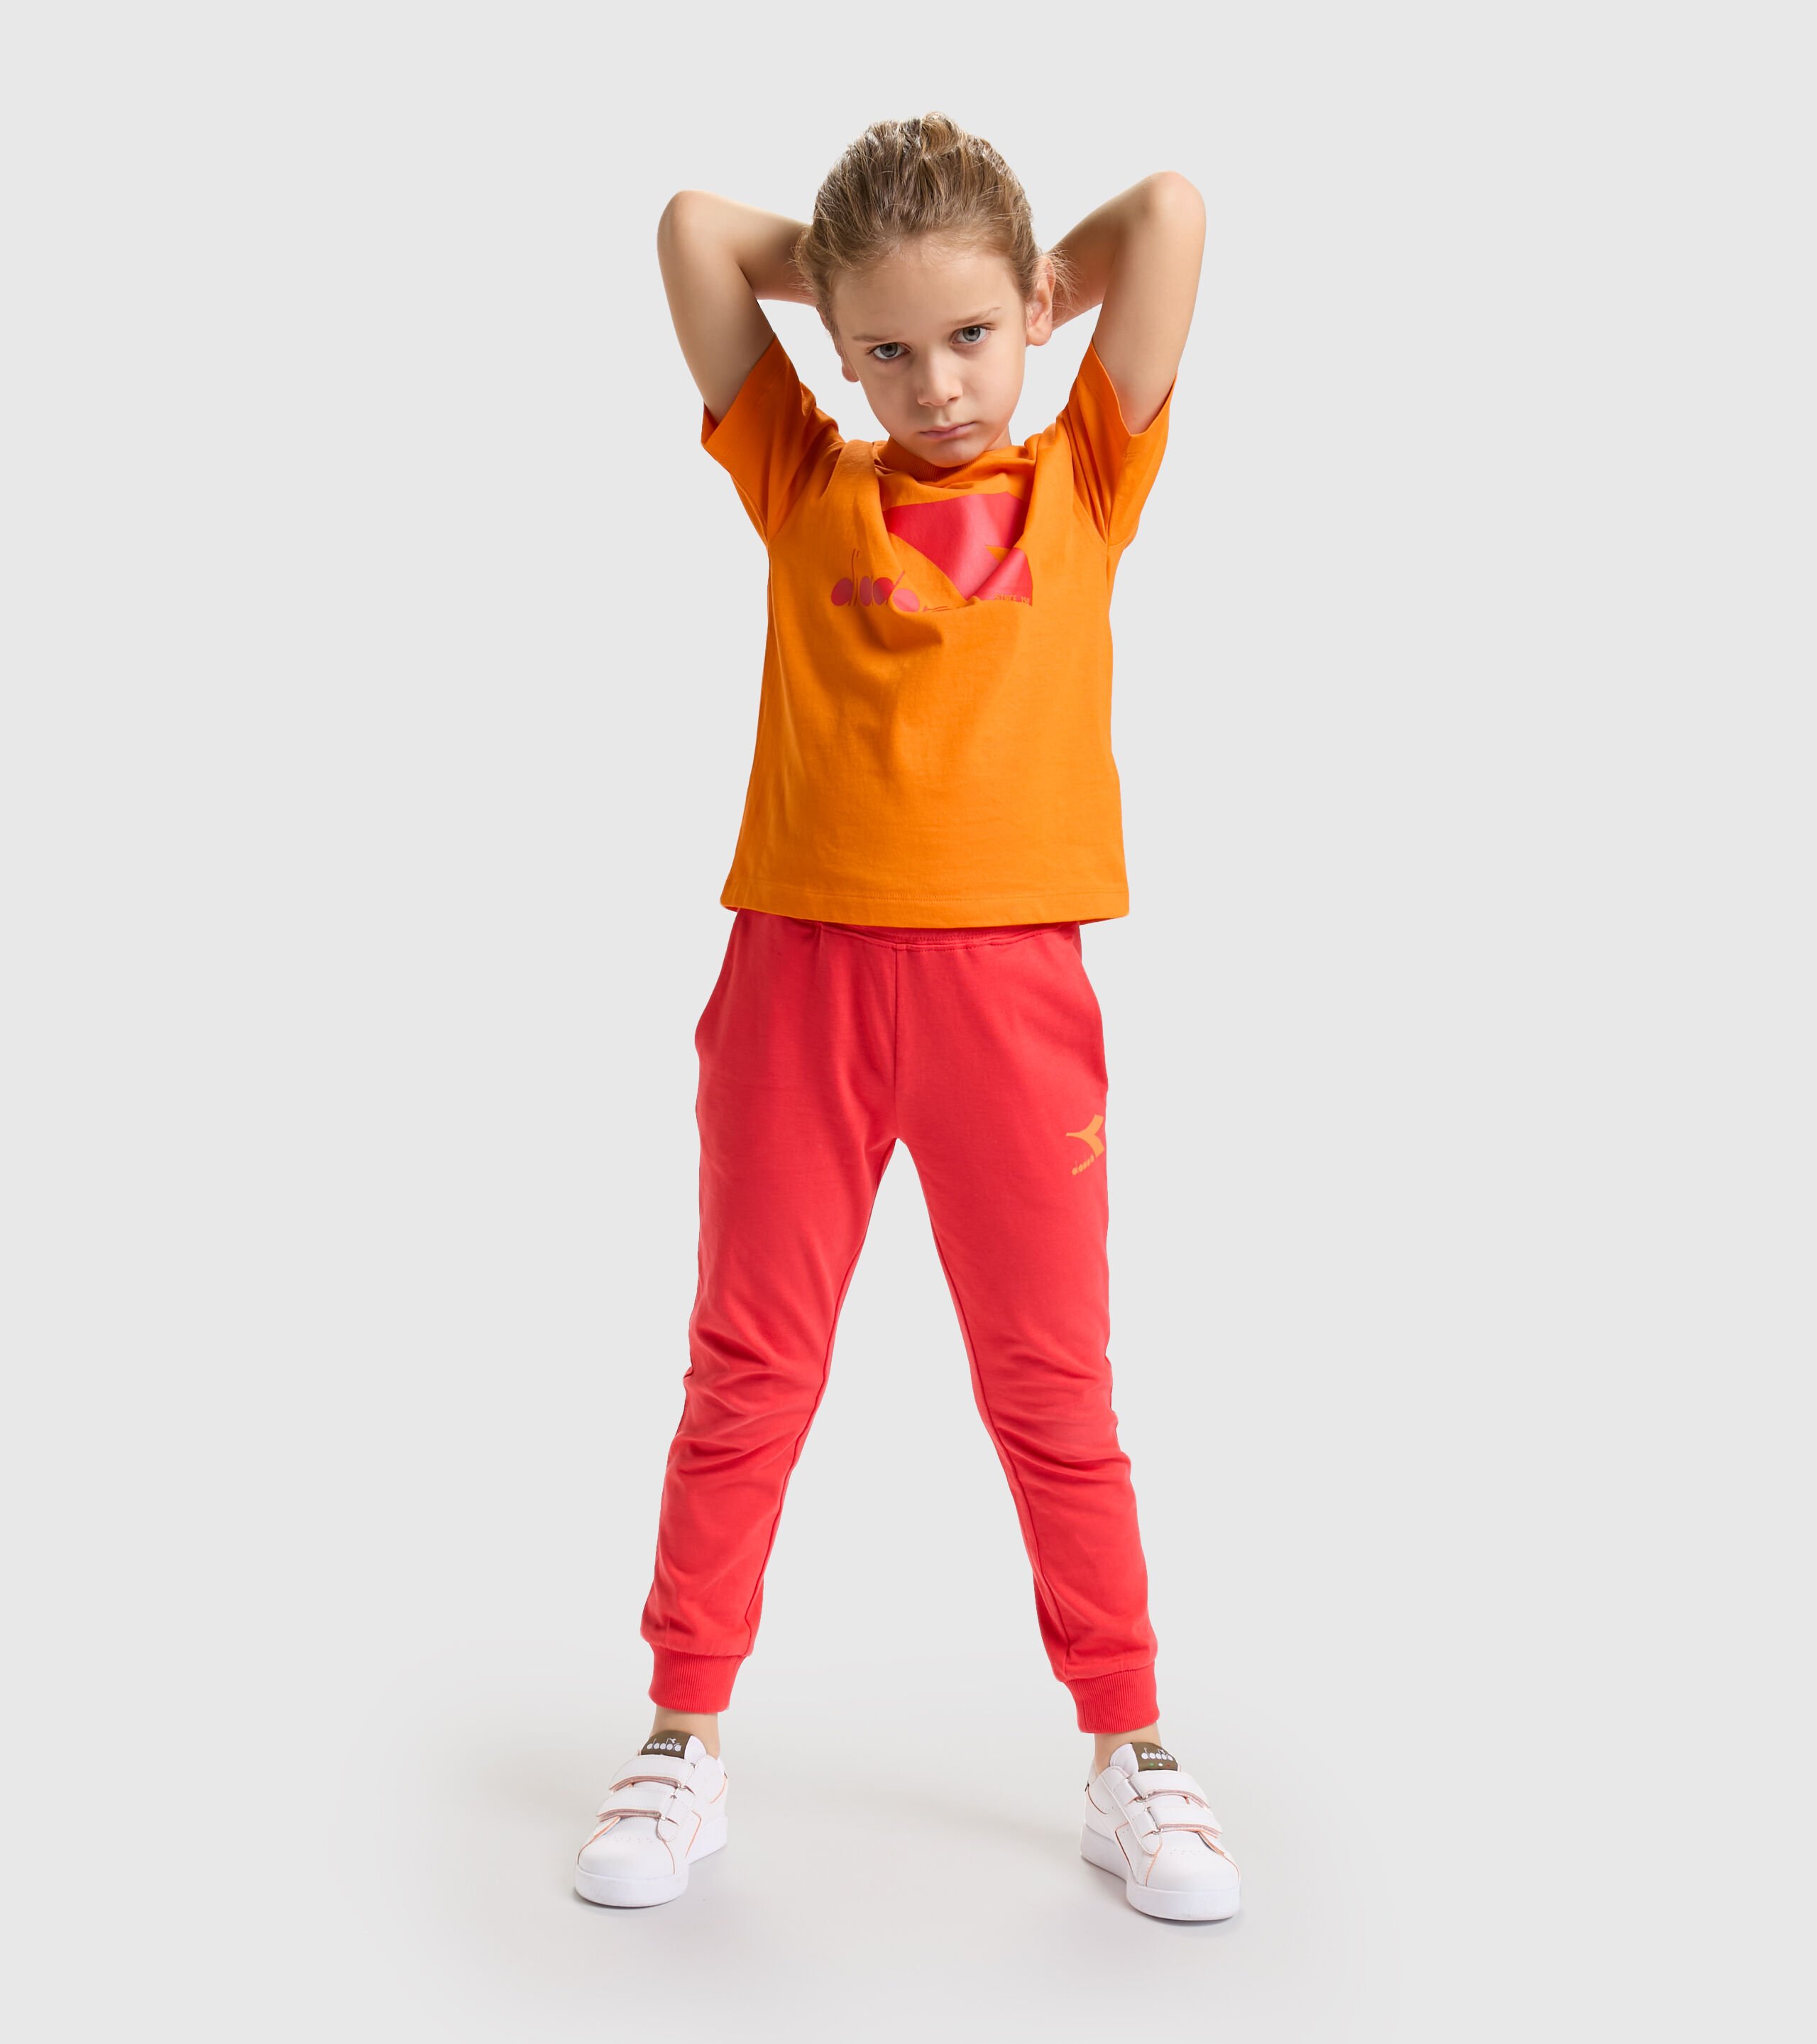 Shop Boys Trousers  Pants from Top Brands  Amazon India